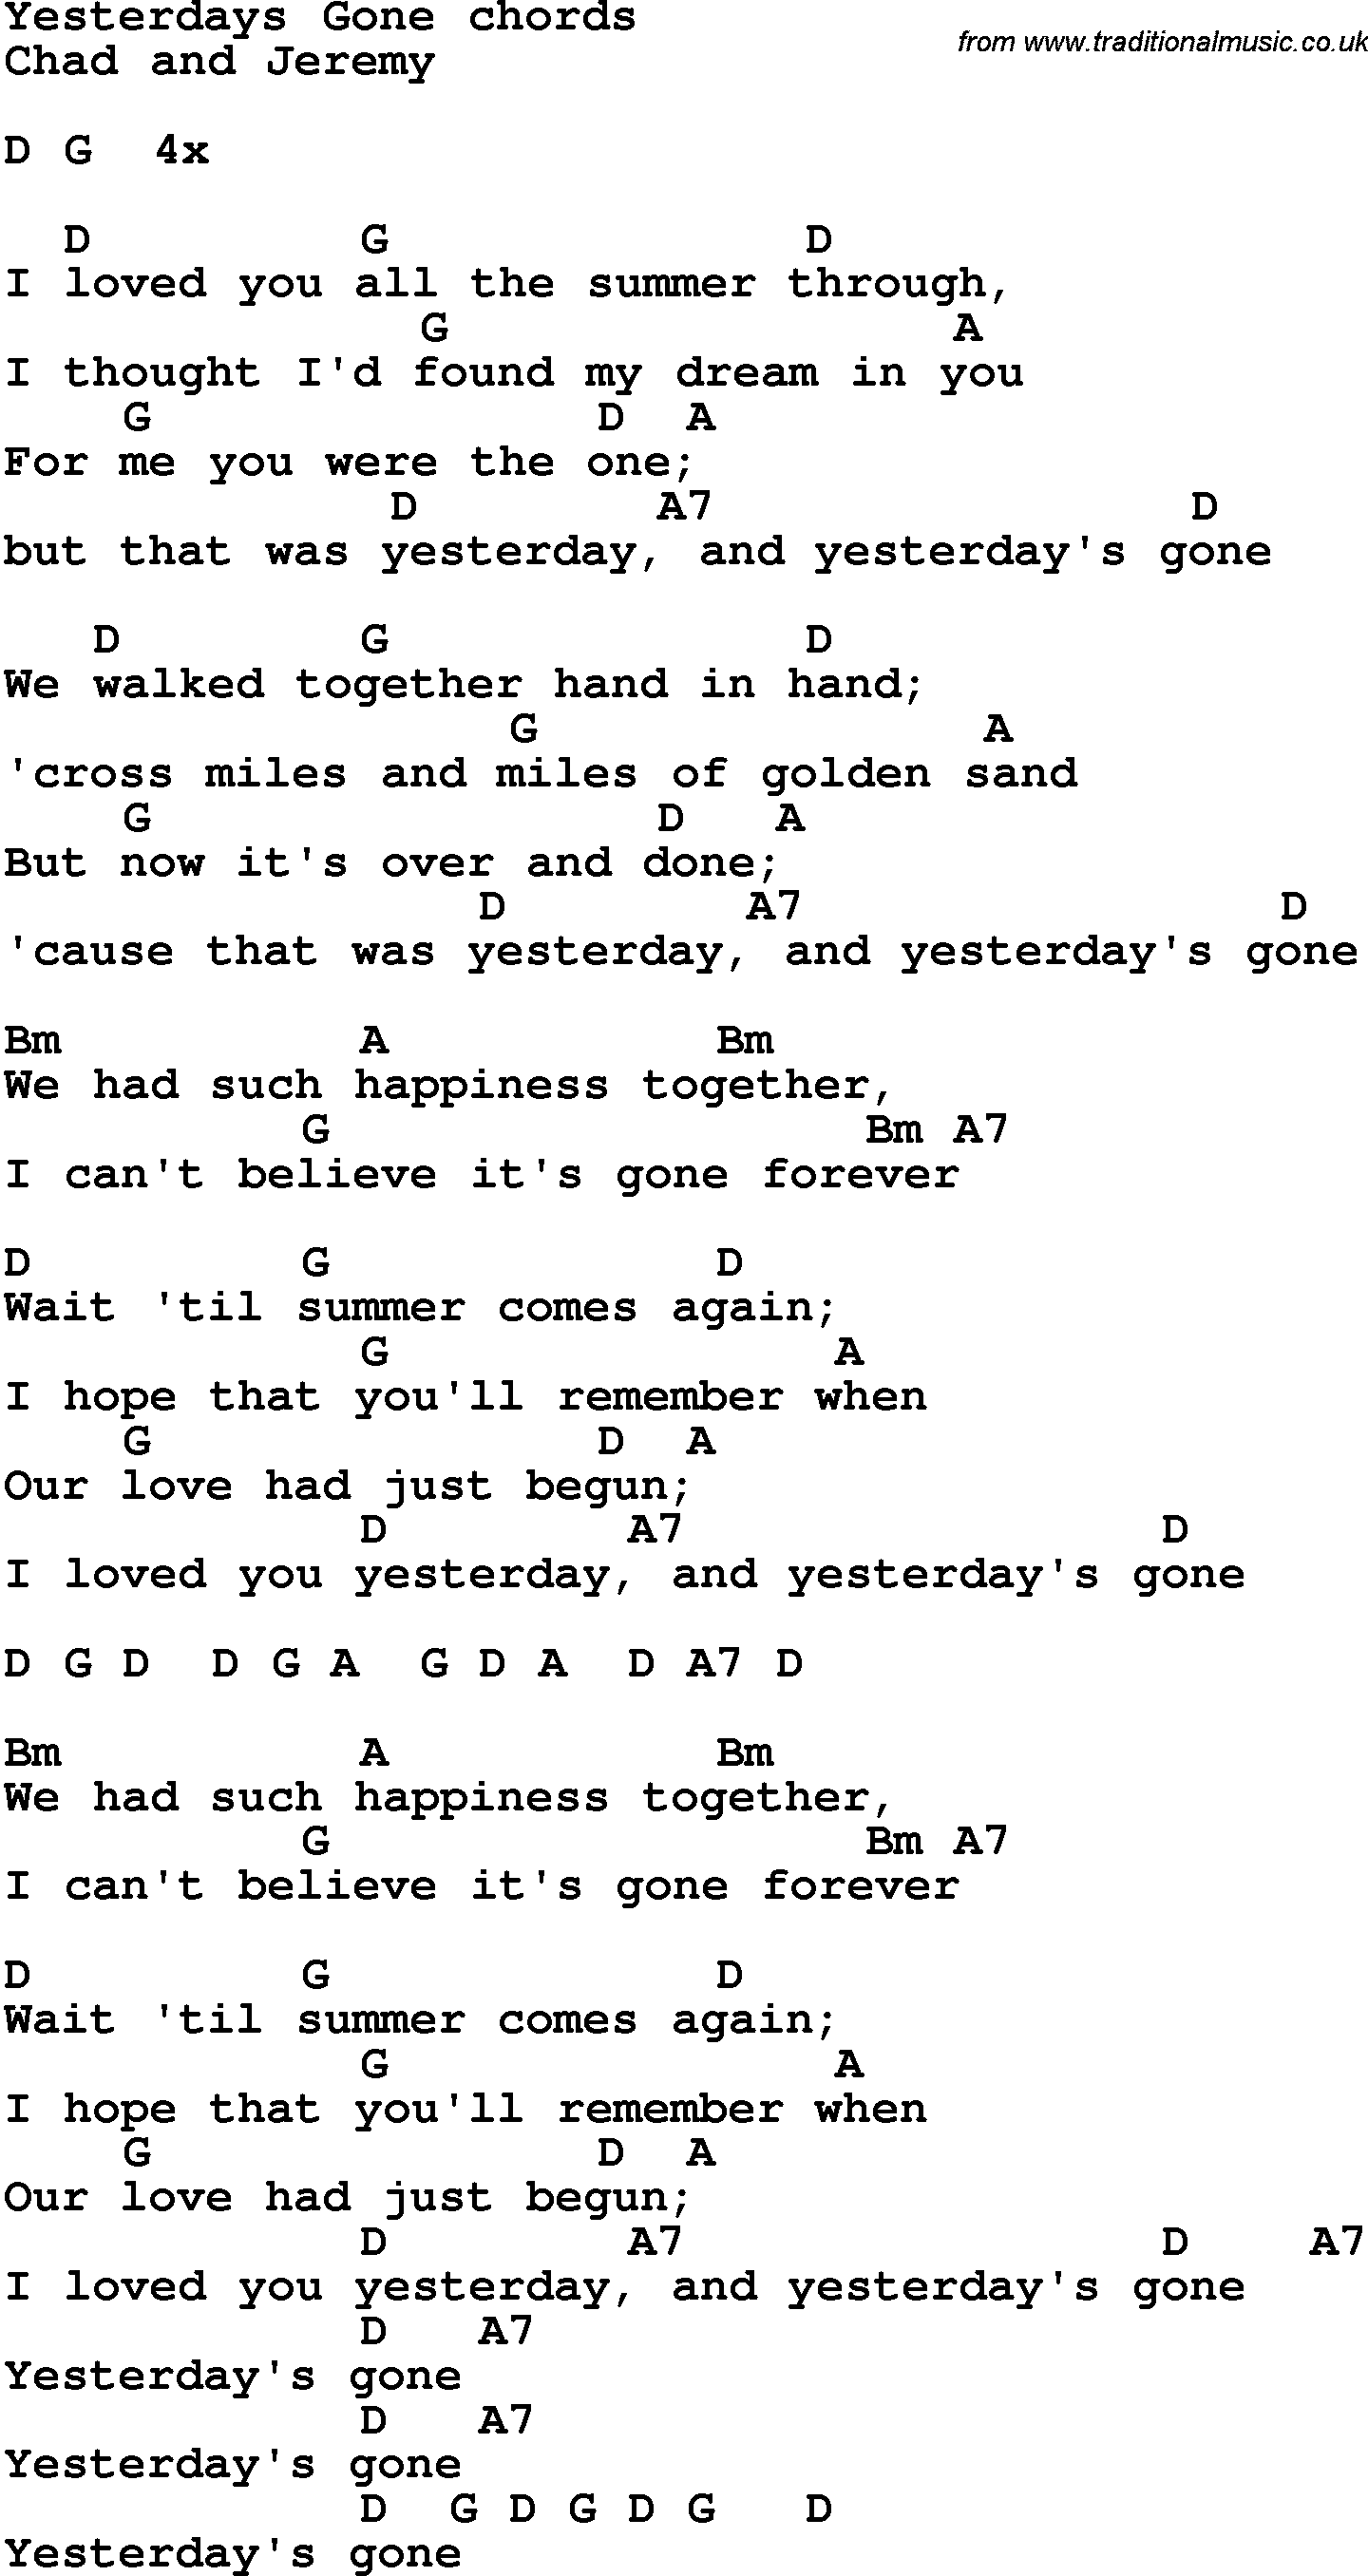 Song Lyrics with guitar chords for Yesterday's Gone